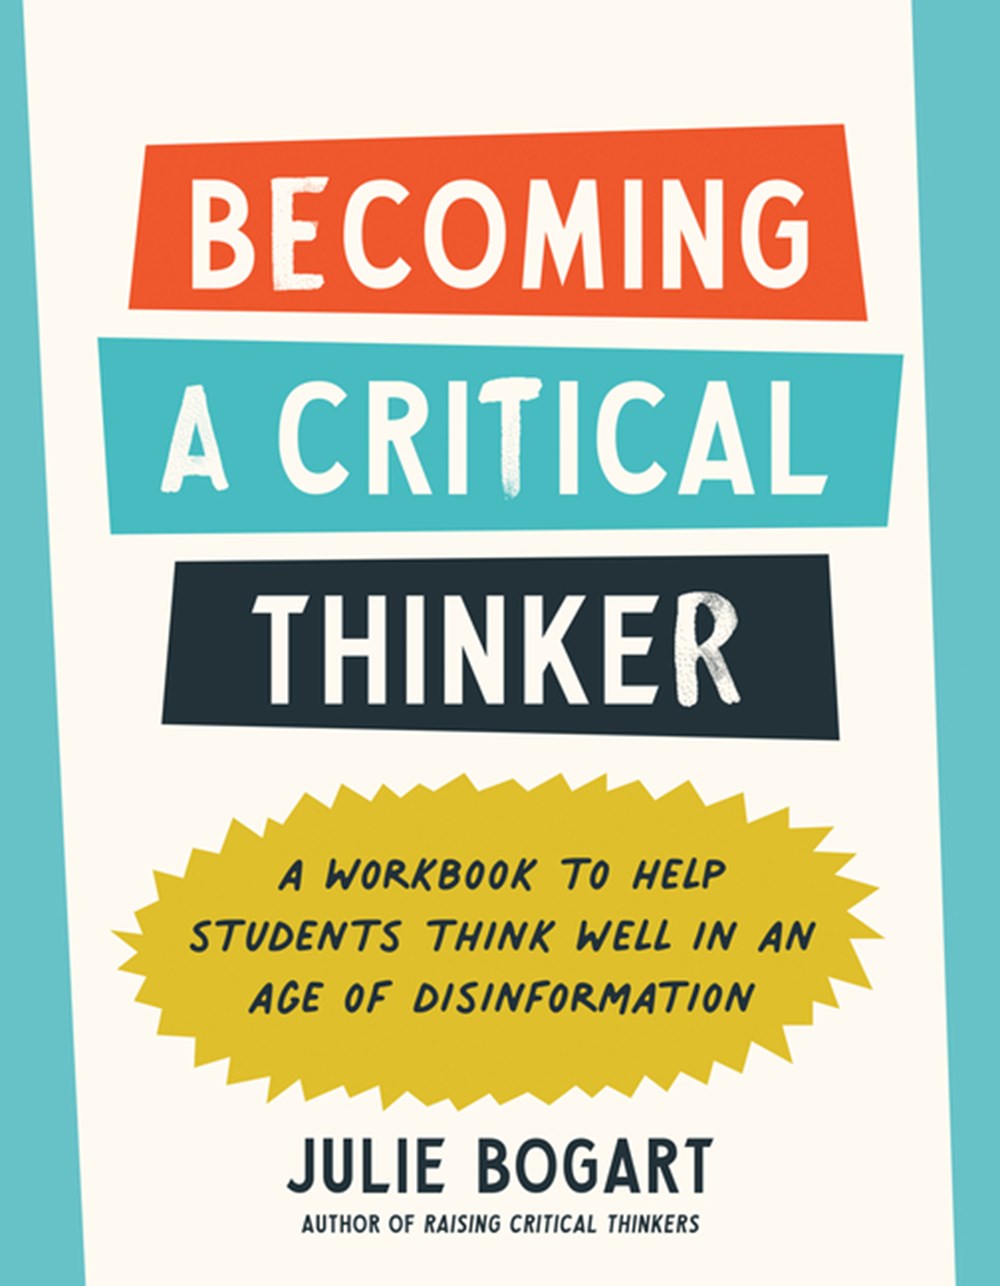 Becoming a Critical Thinker A Workbook to Help Students Think Well in an Age of Disinformation